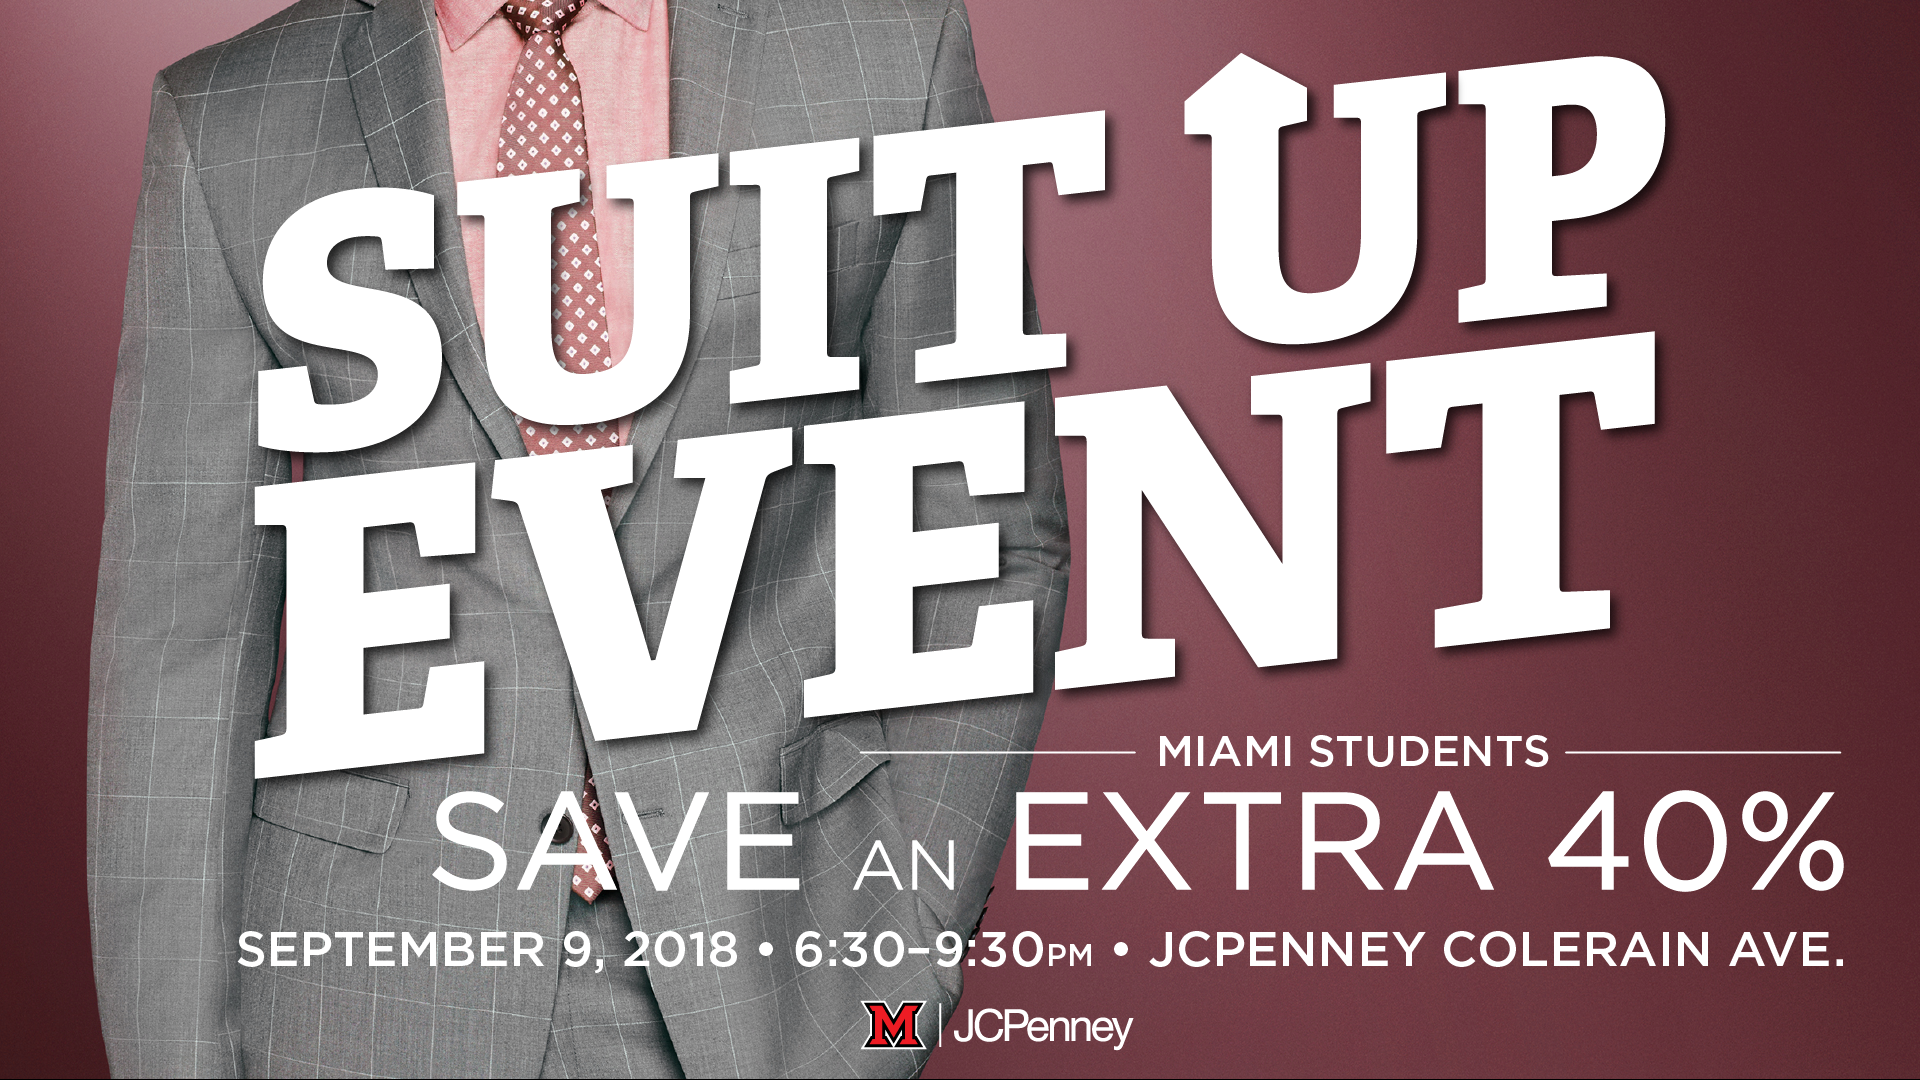 An exclusive event for Miami University students